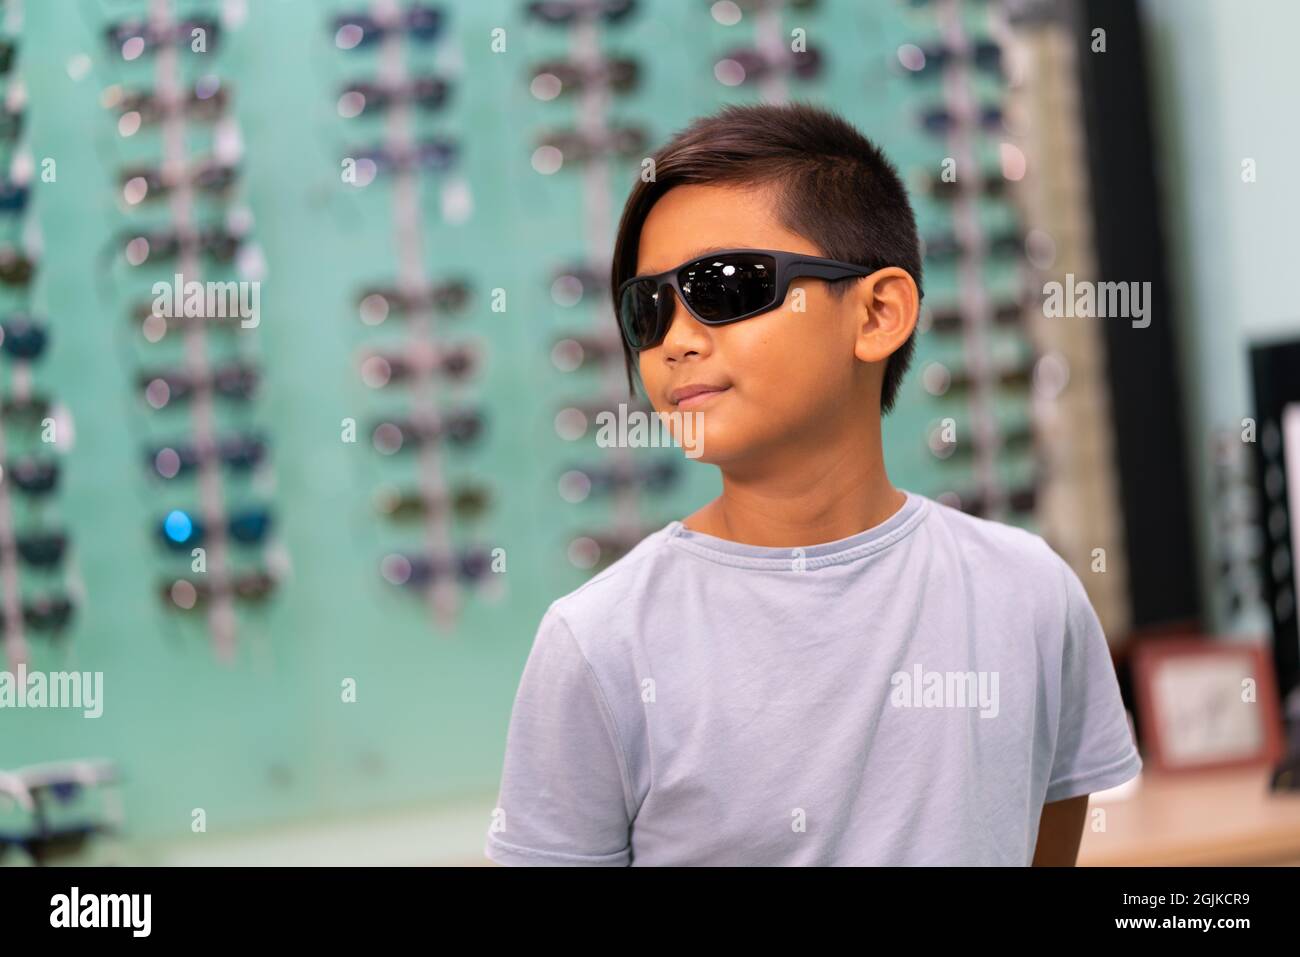 An Asian boy wearing sunglasses in a glasses store Stock Photo